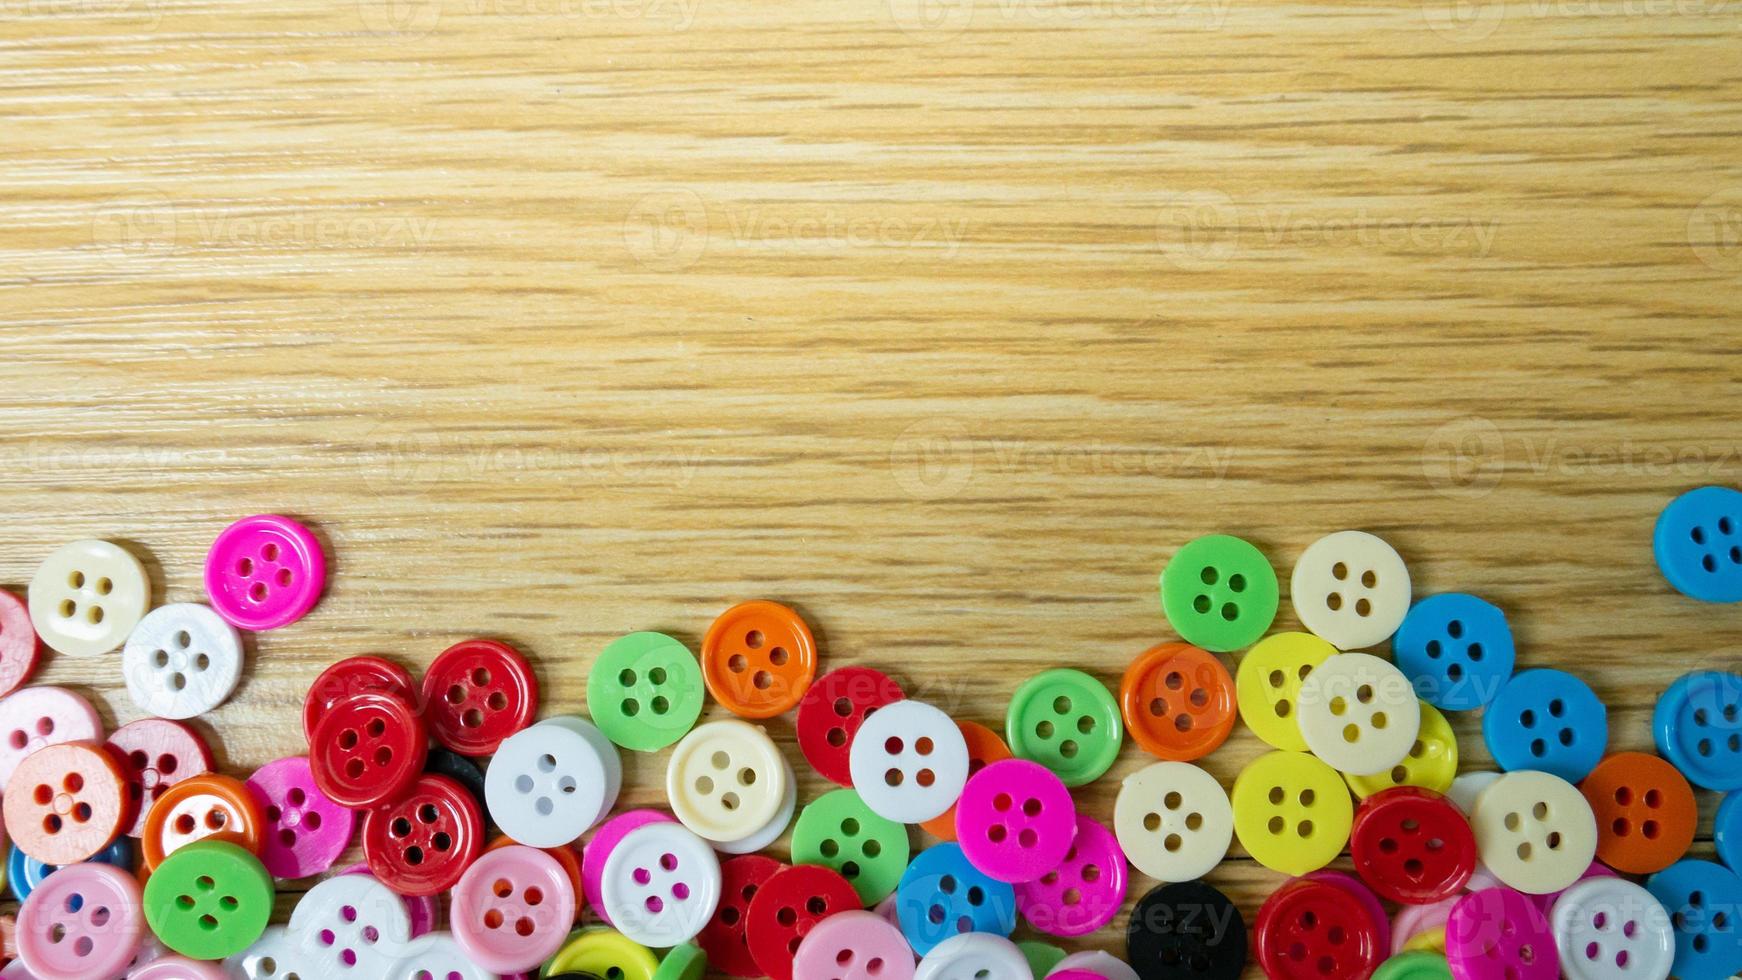 The  button multicolour  on wood table for background concept photo